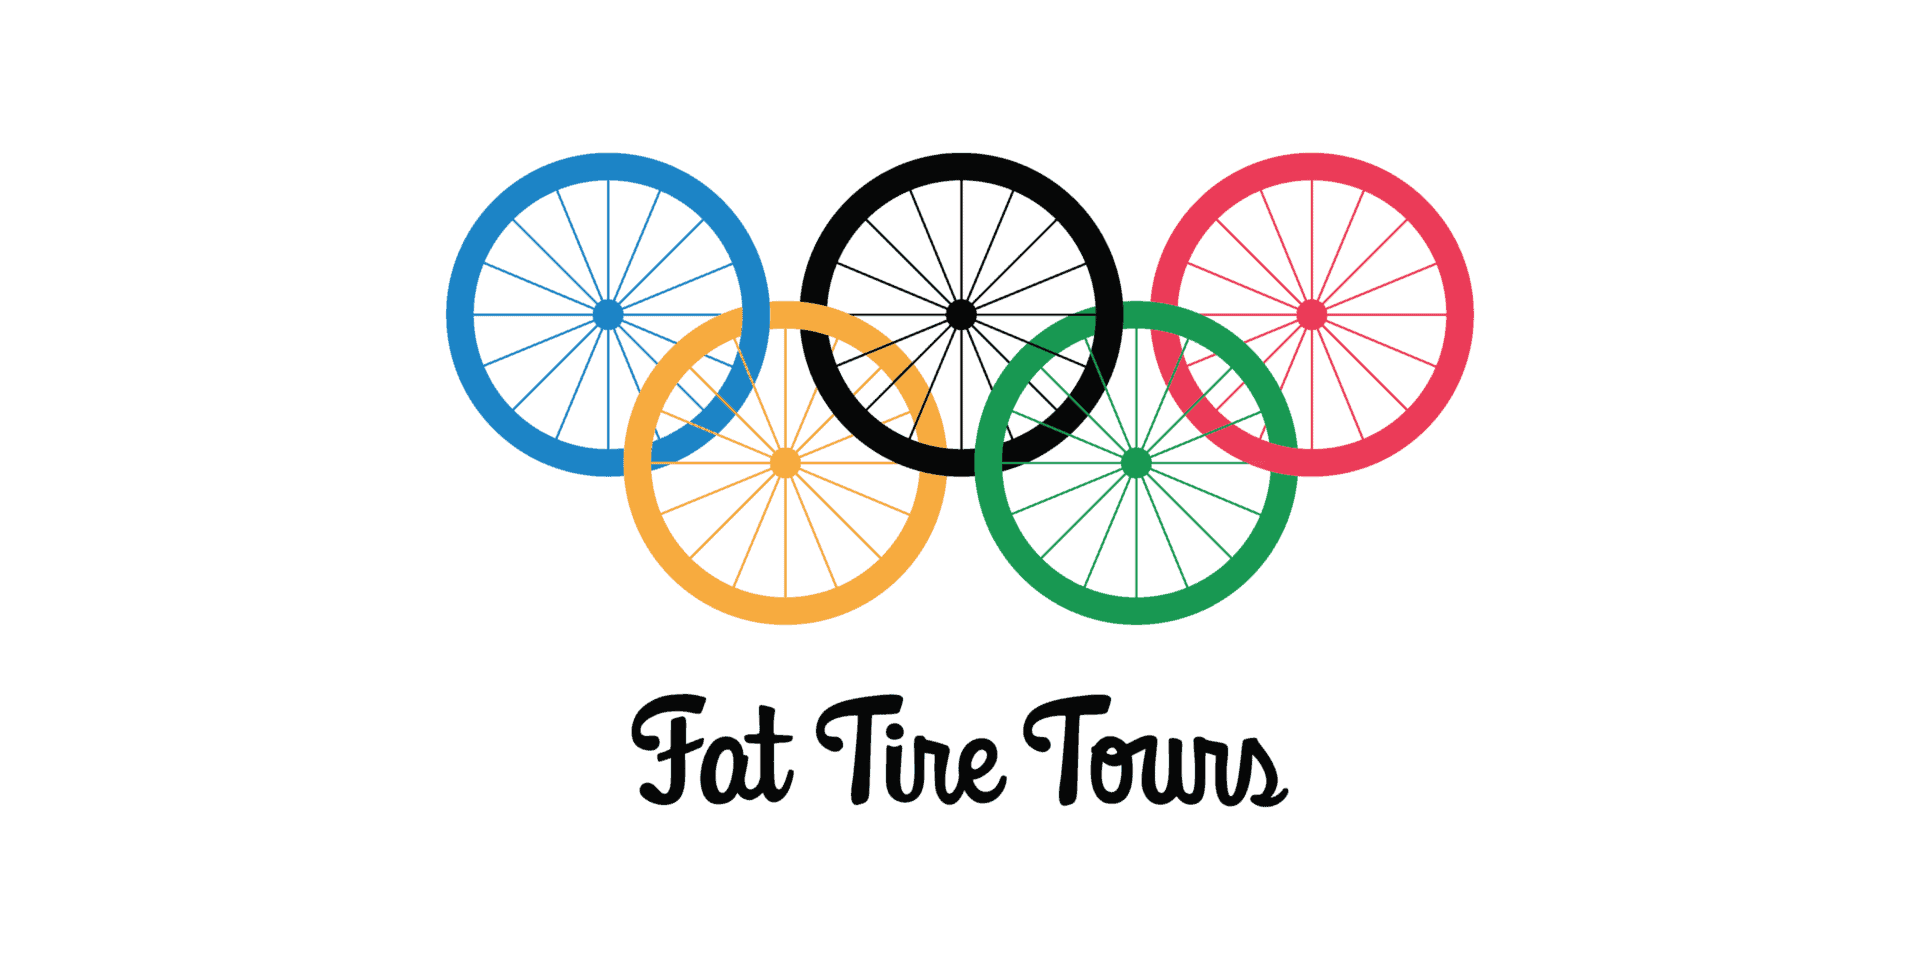 The Olympics rings as bicycle wheels